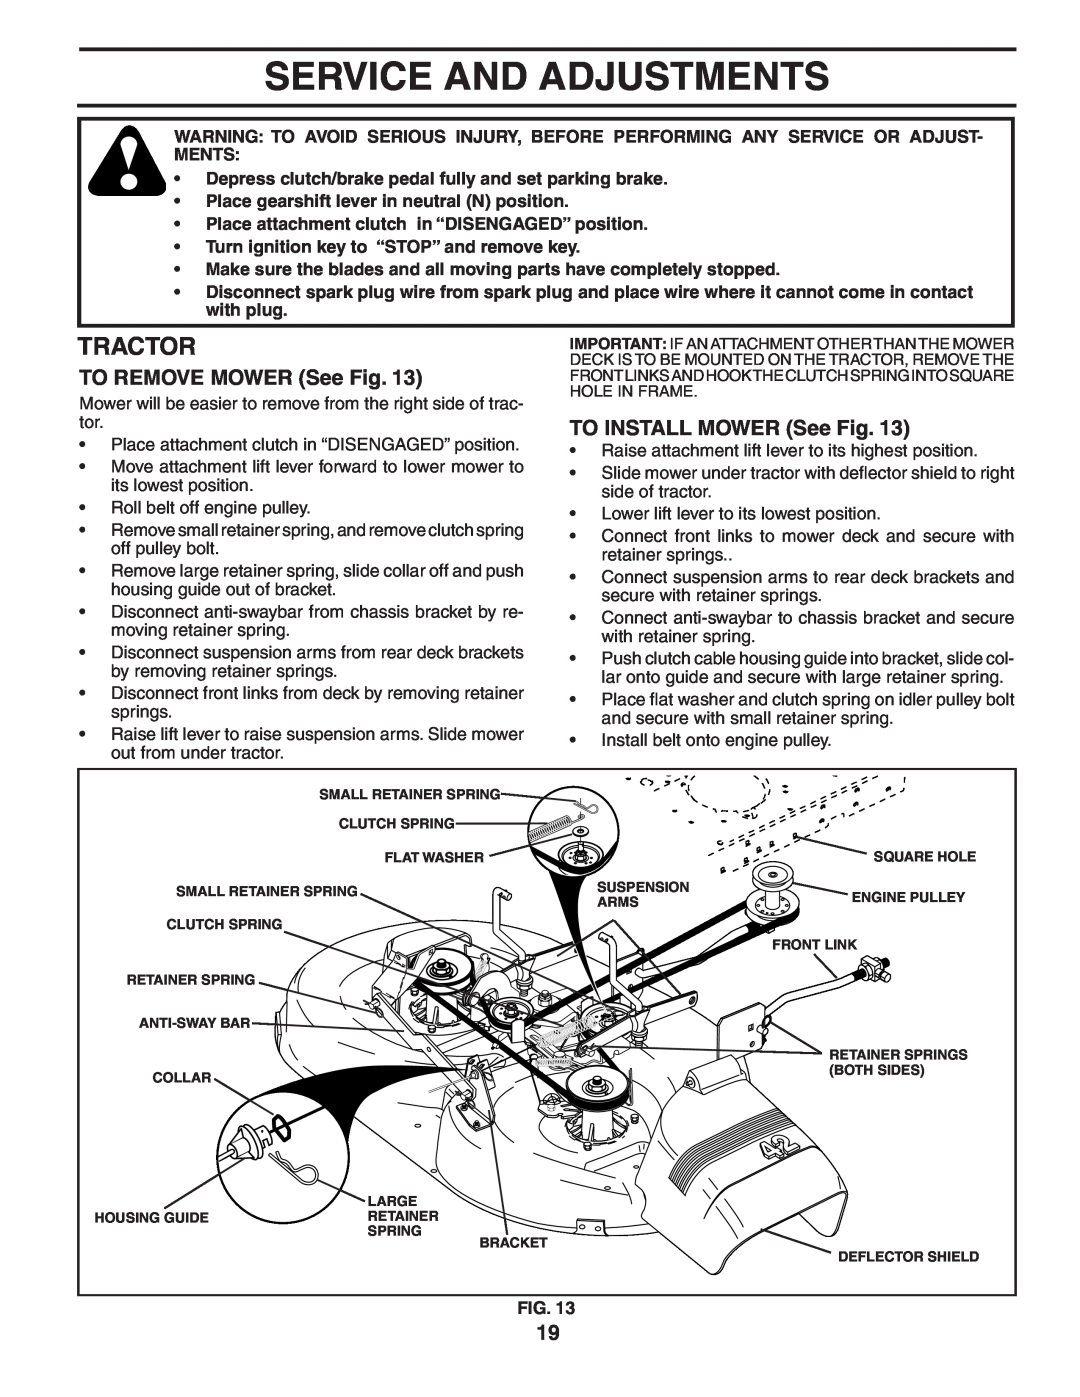 Poulan 403315 manual Service And Adjustments, TO REMOVE MOWER See Fig, TO INSTALL MOWER See Fig, Tractor 